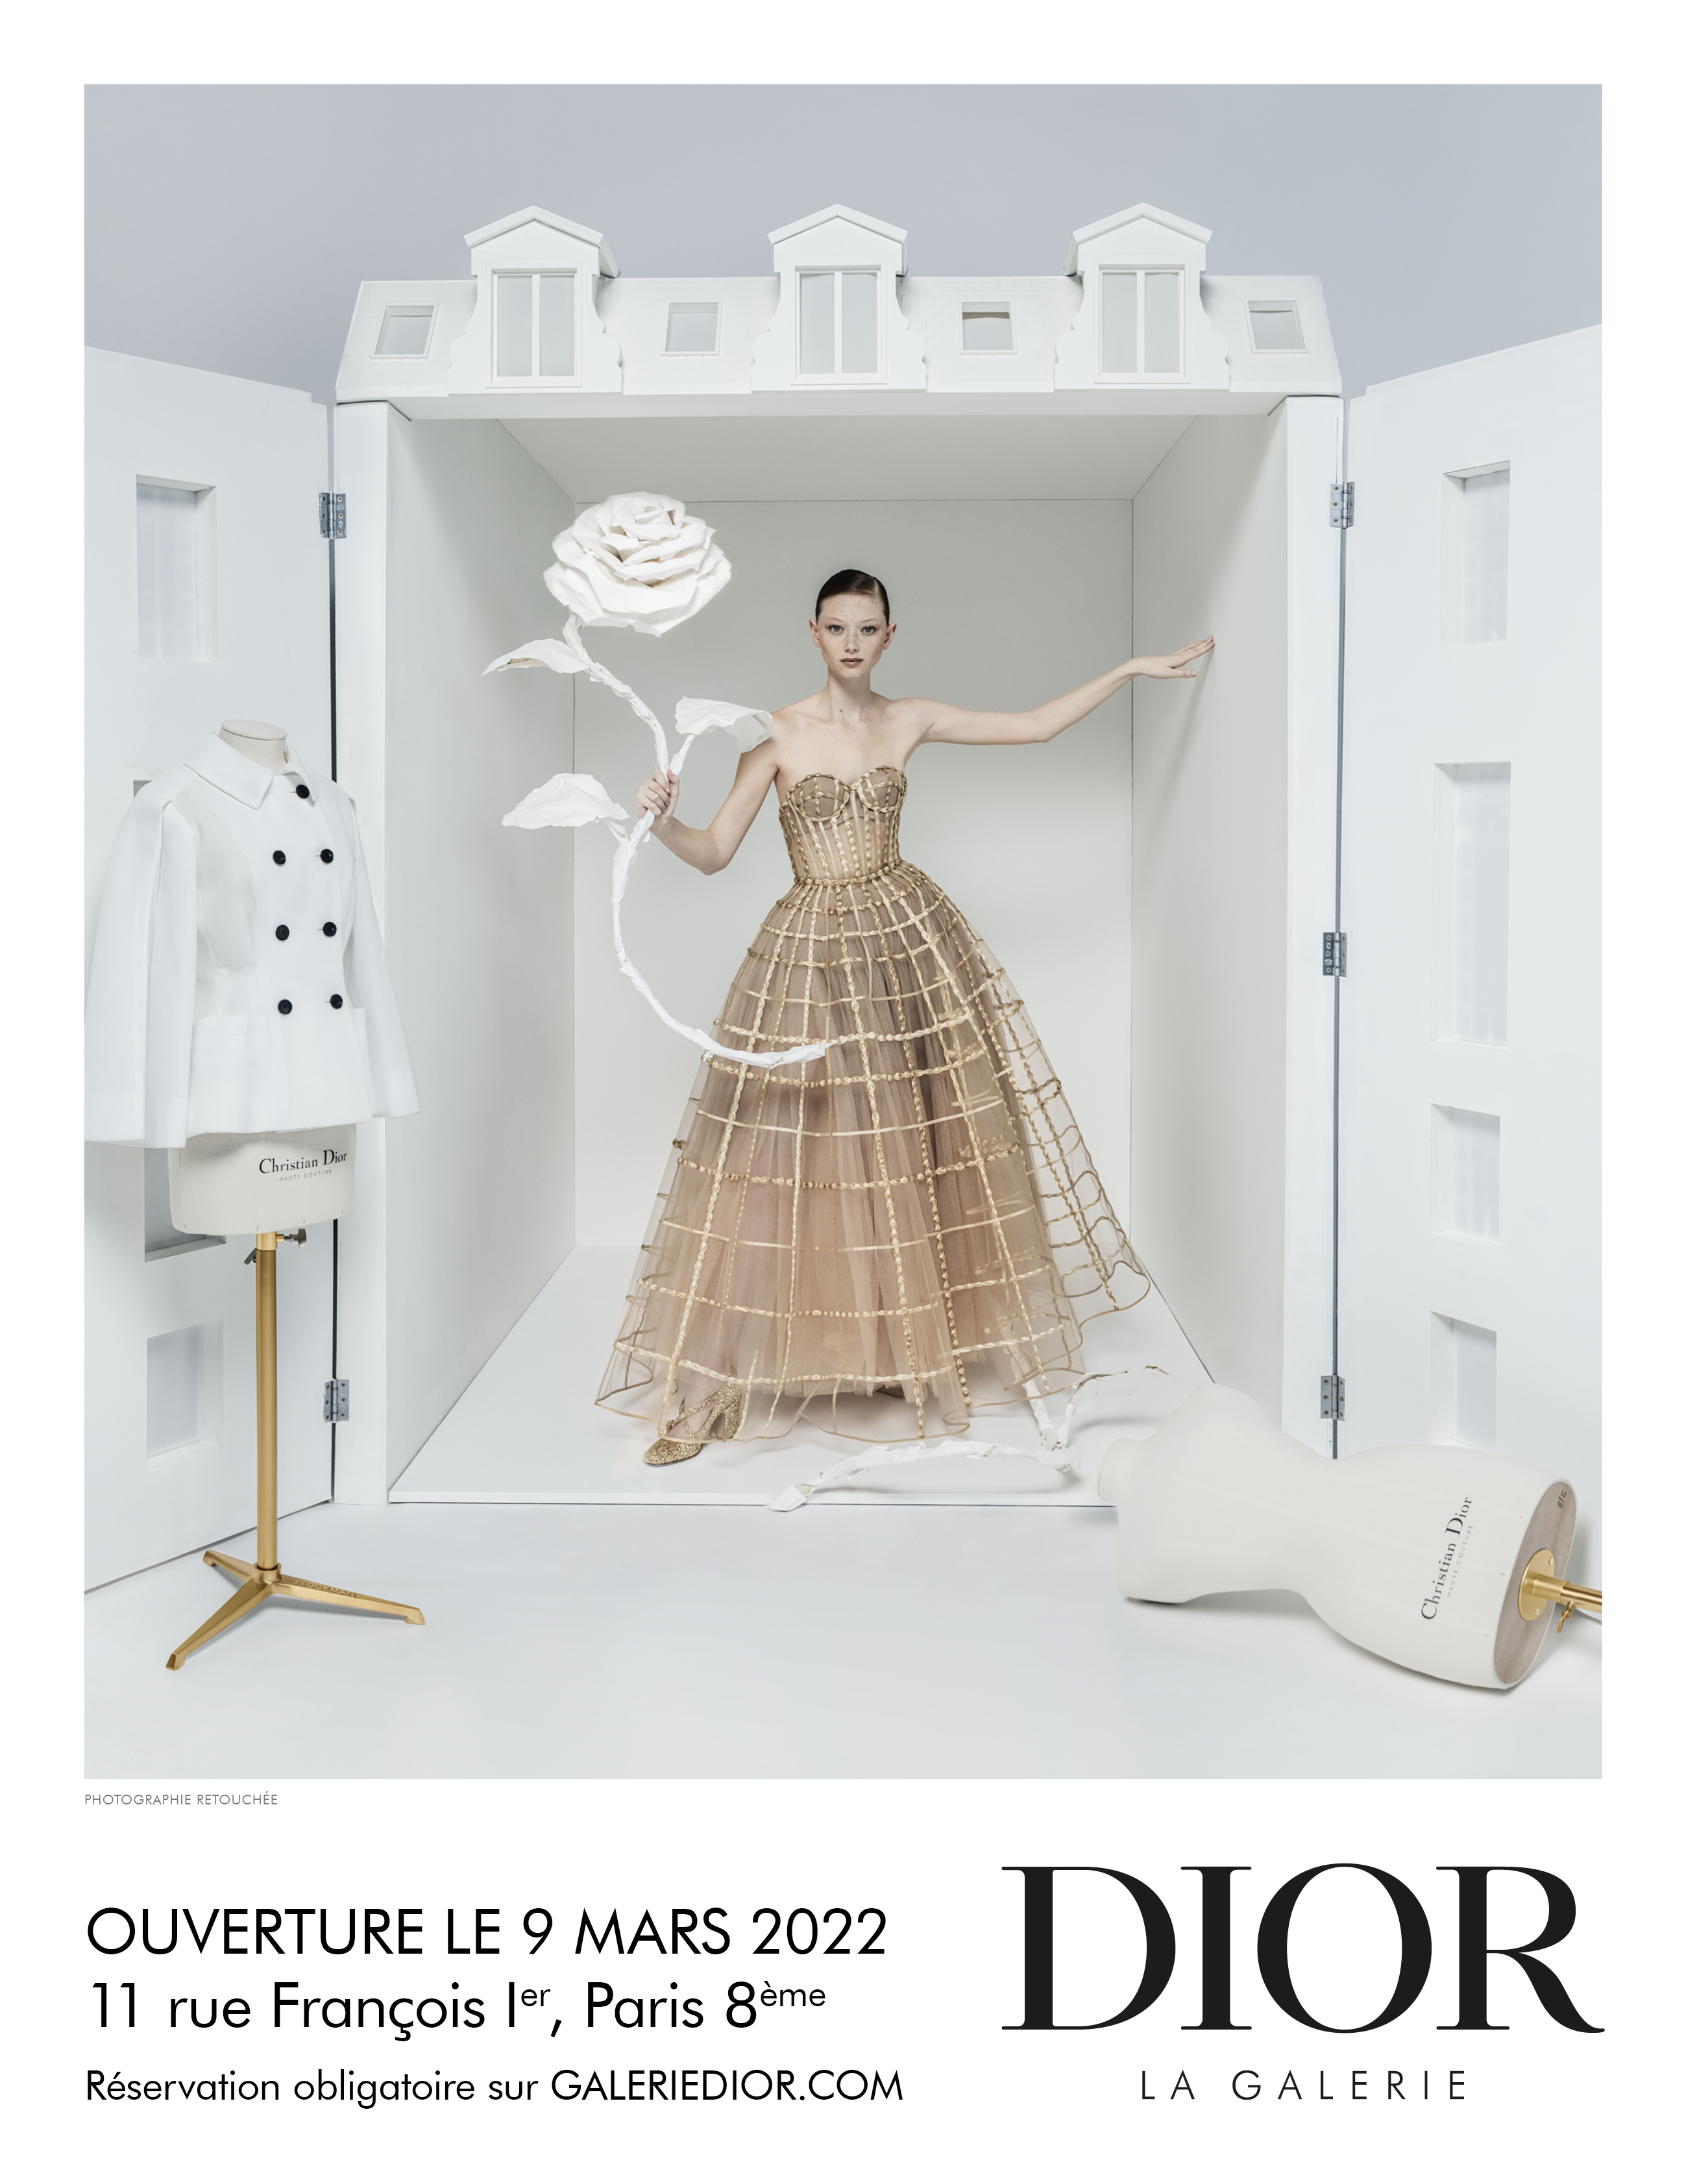 You are invited to Monsieur Christian Dior's ball – Ritournelle